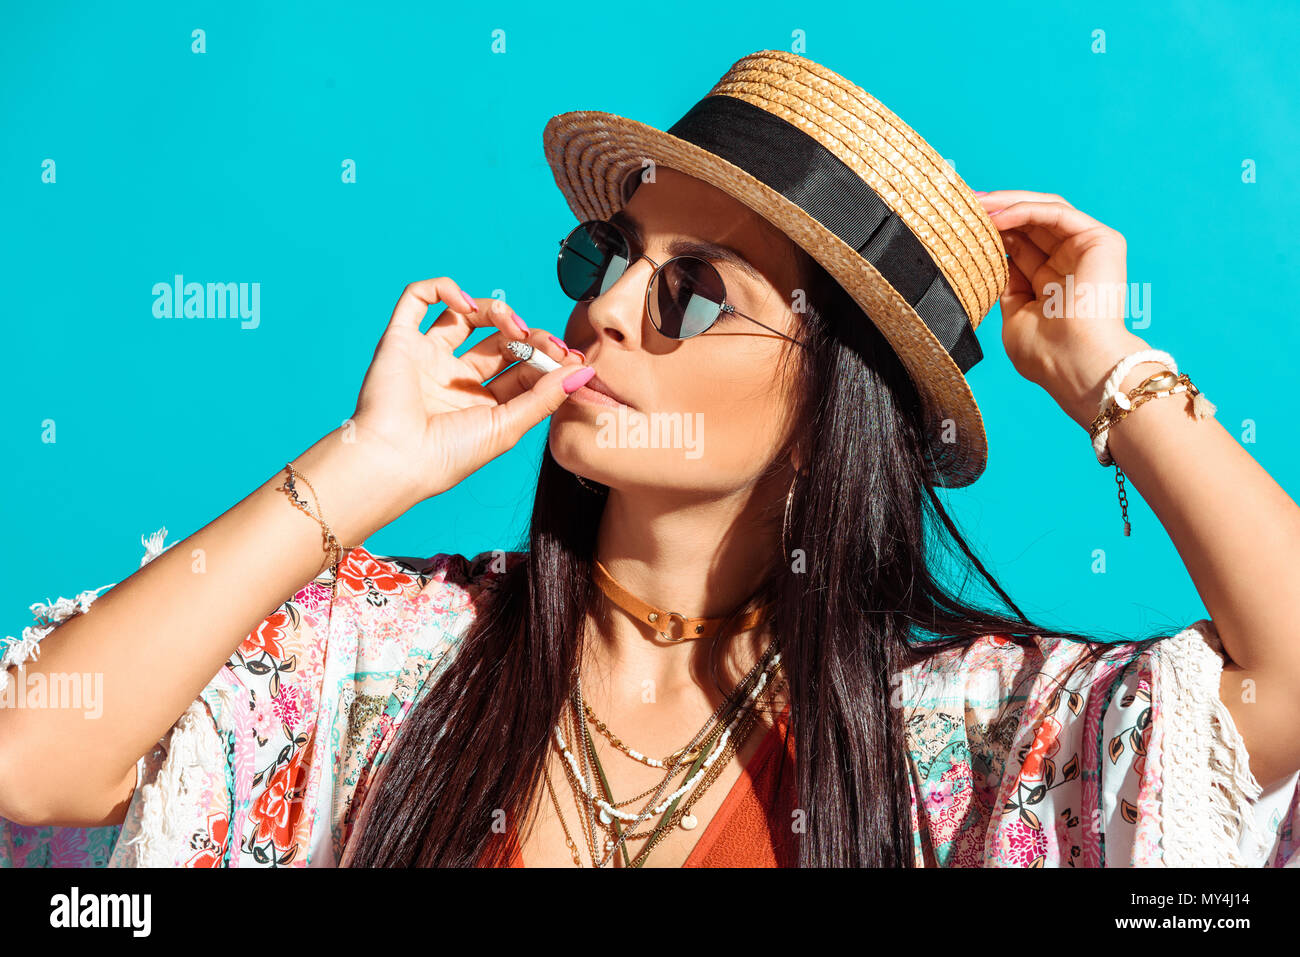 Attractive bohemian girl smoking cigarette isolated on turquoise Stock Photo